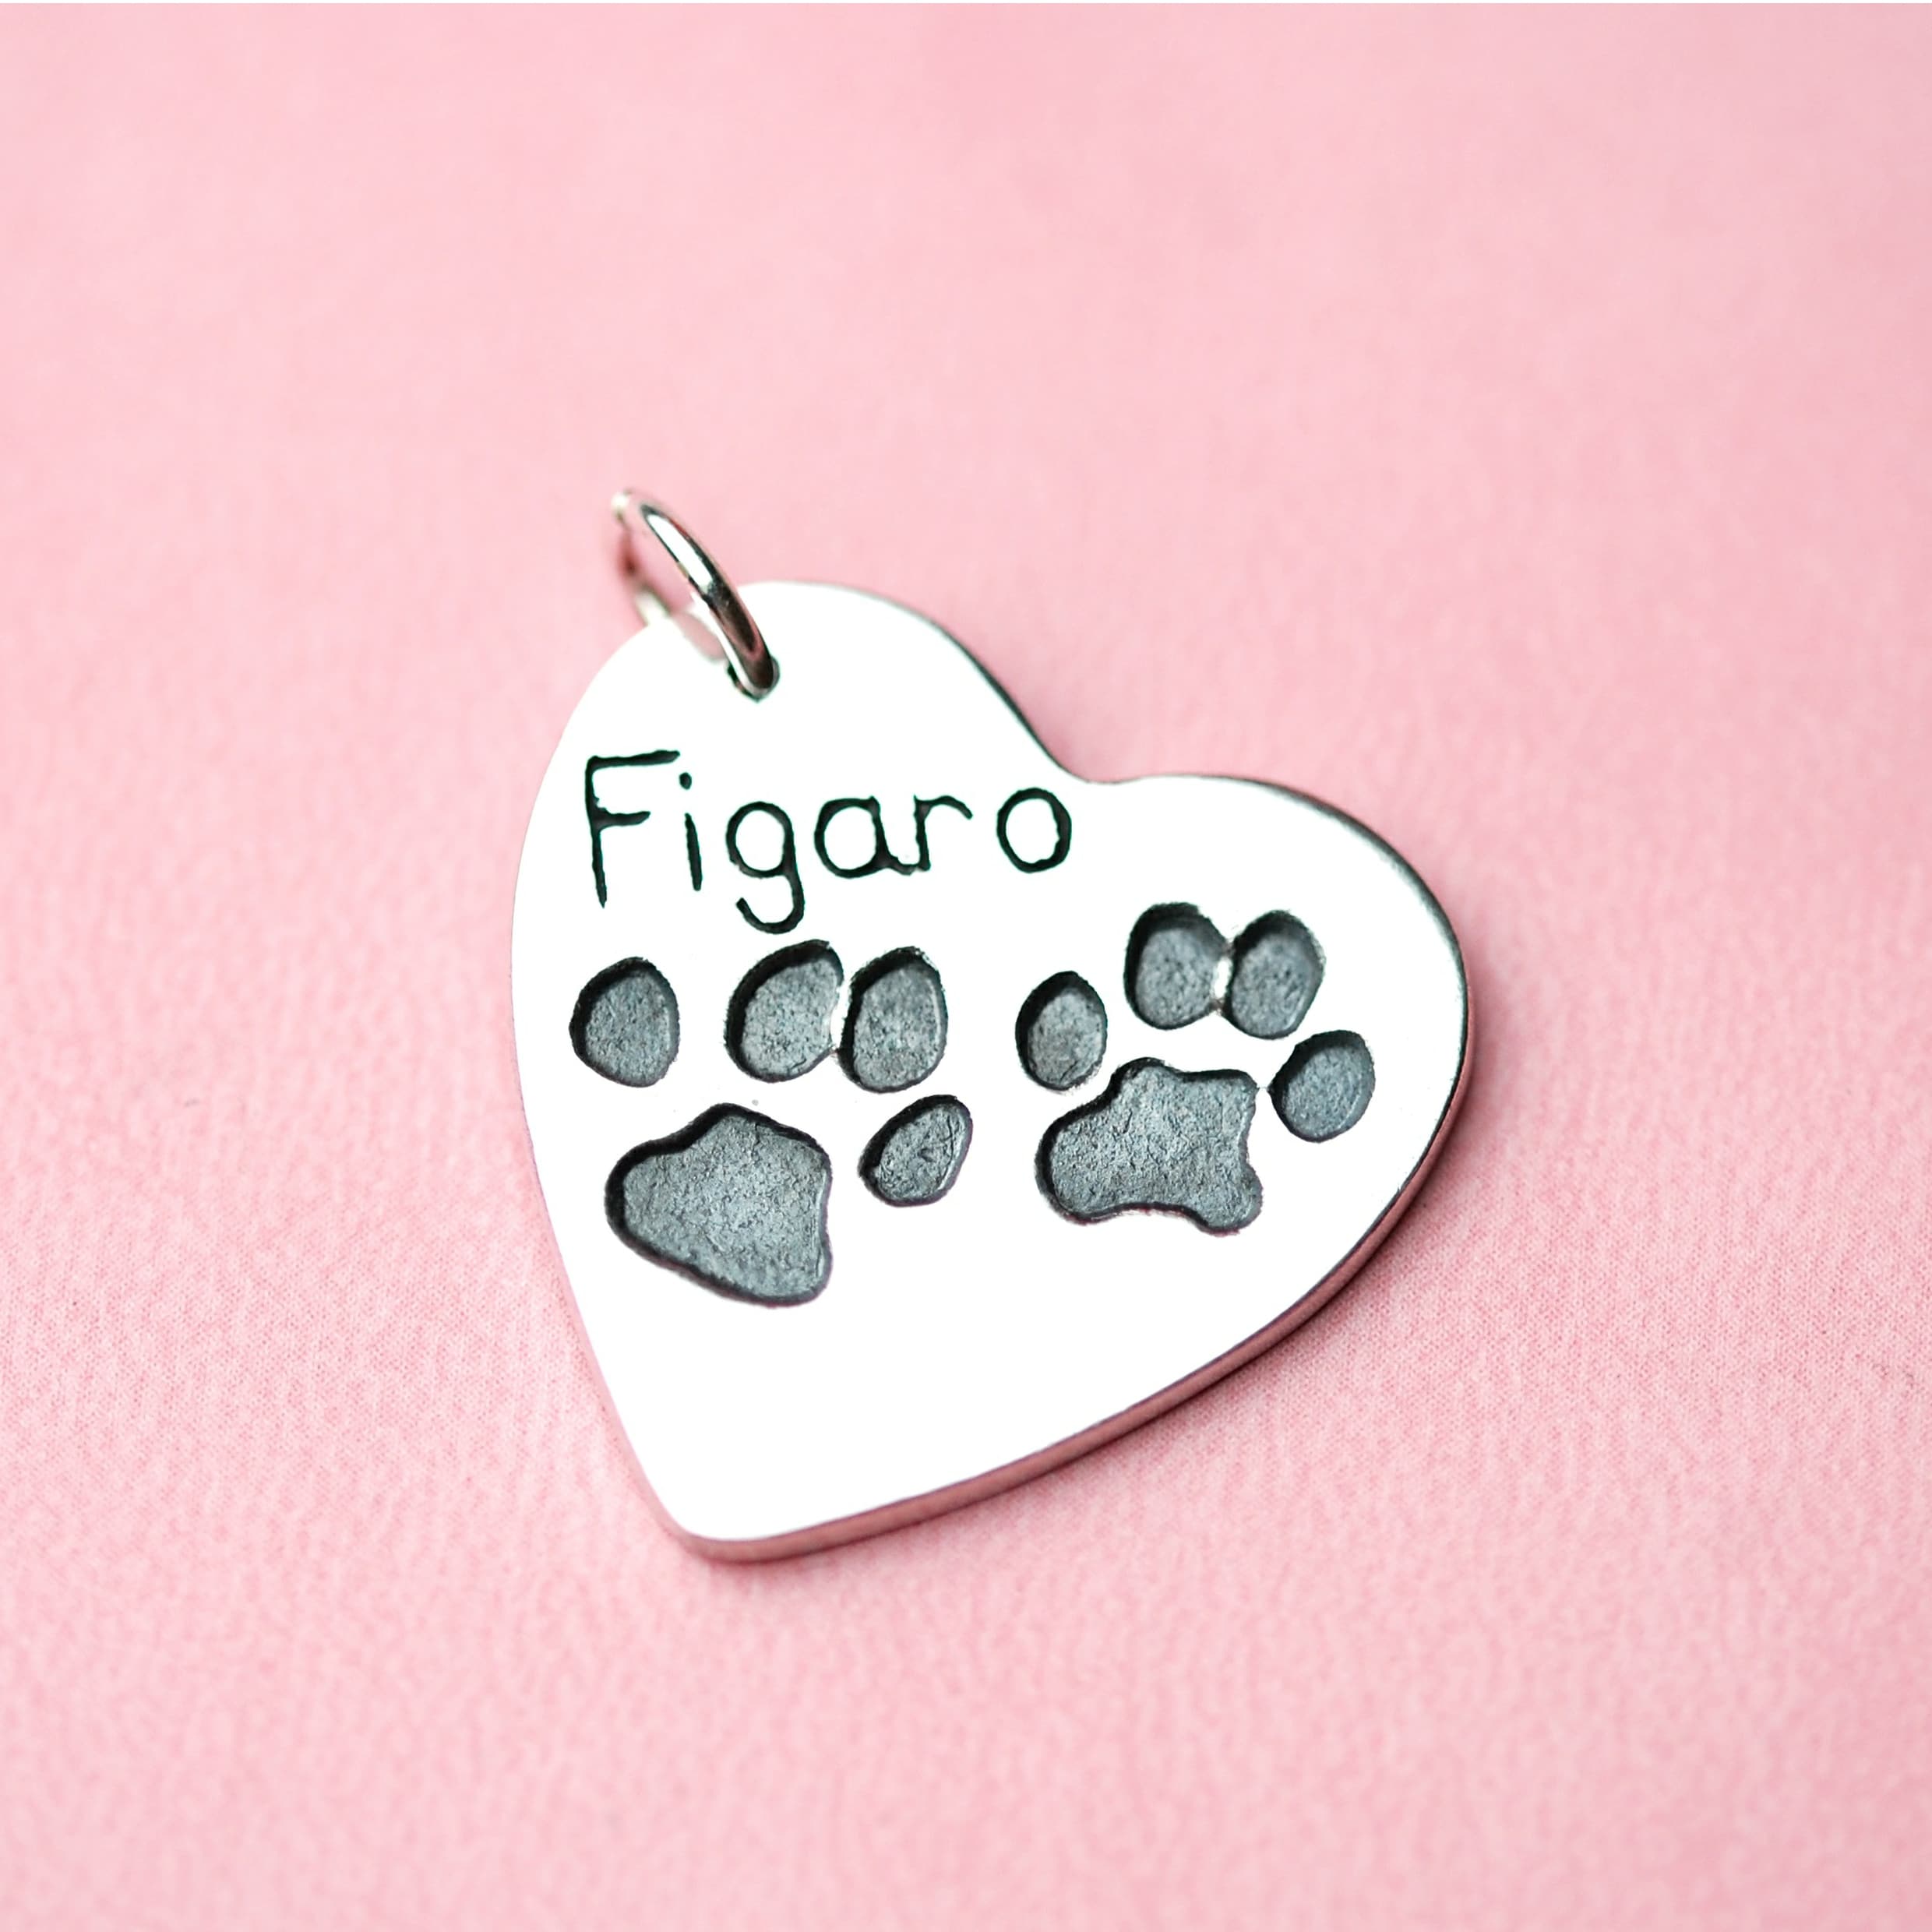 Sterling silver charm with cat paw prints